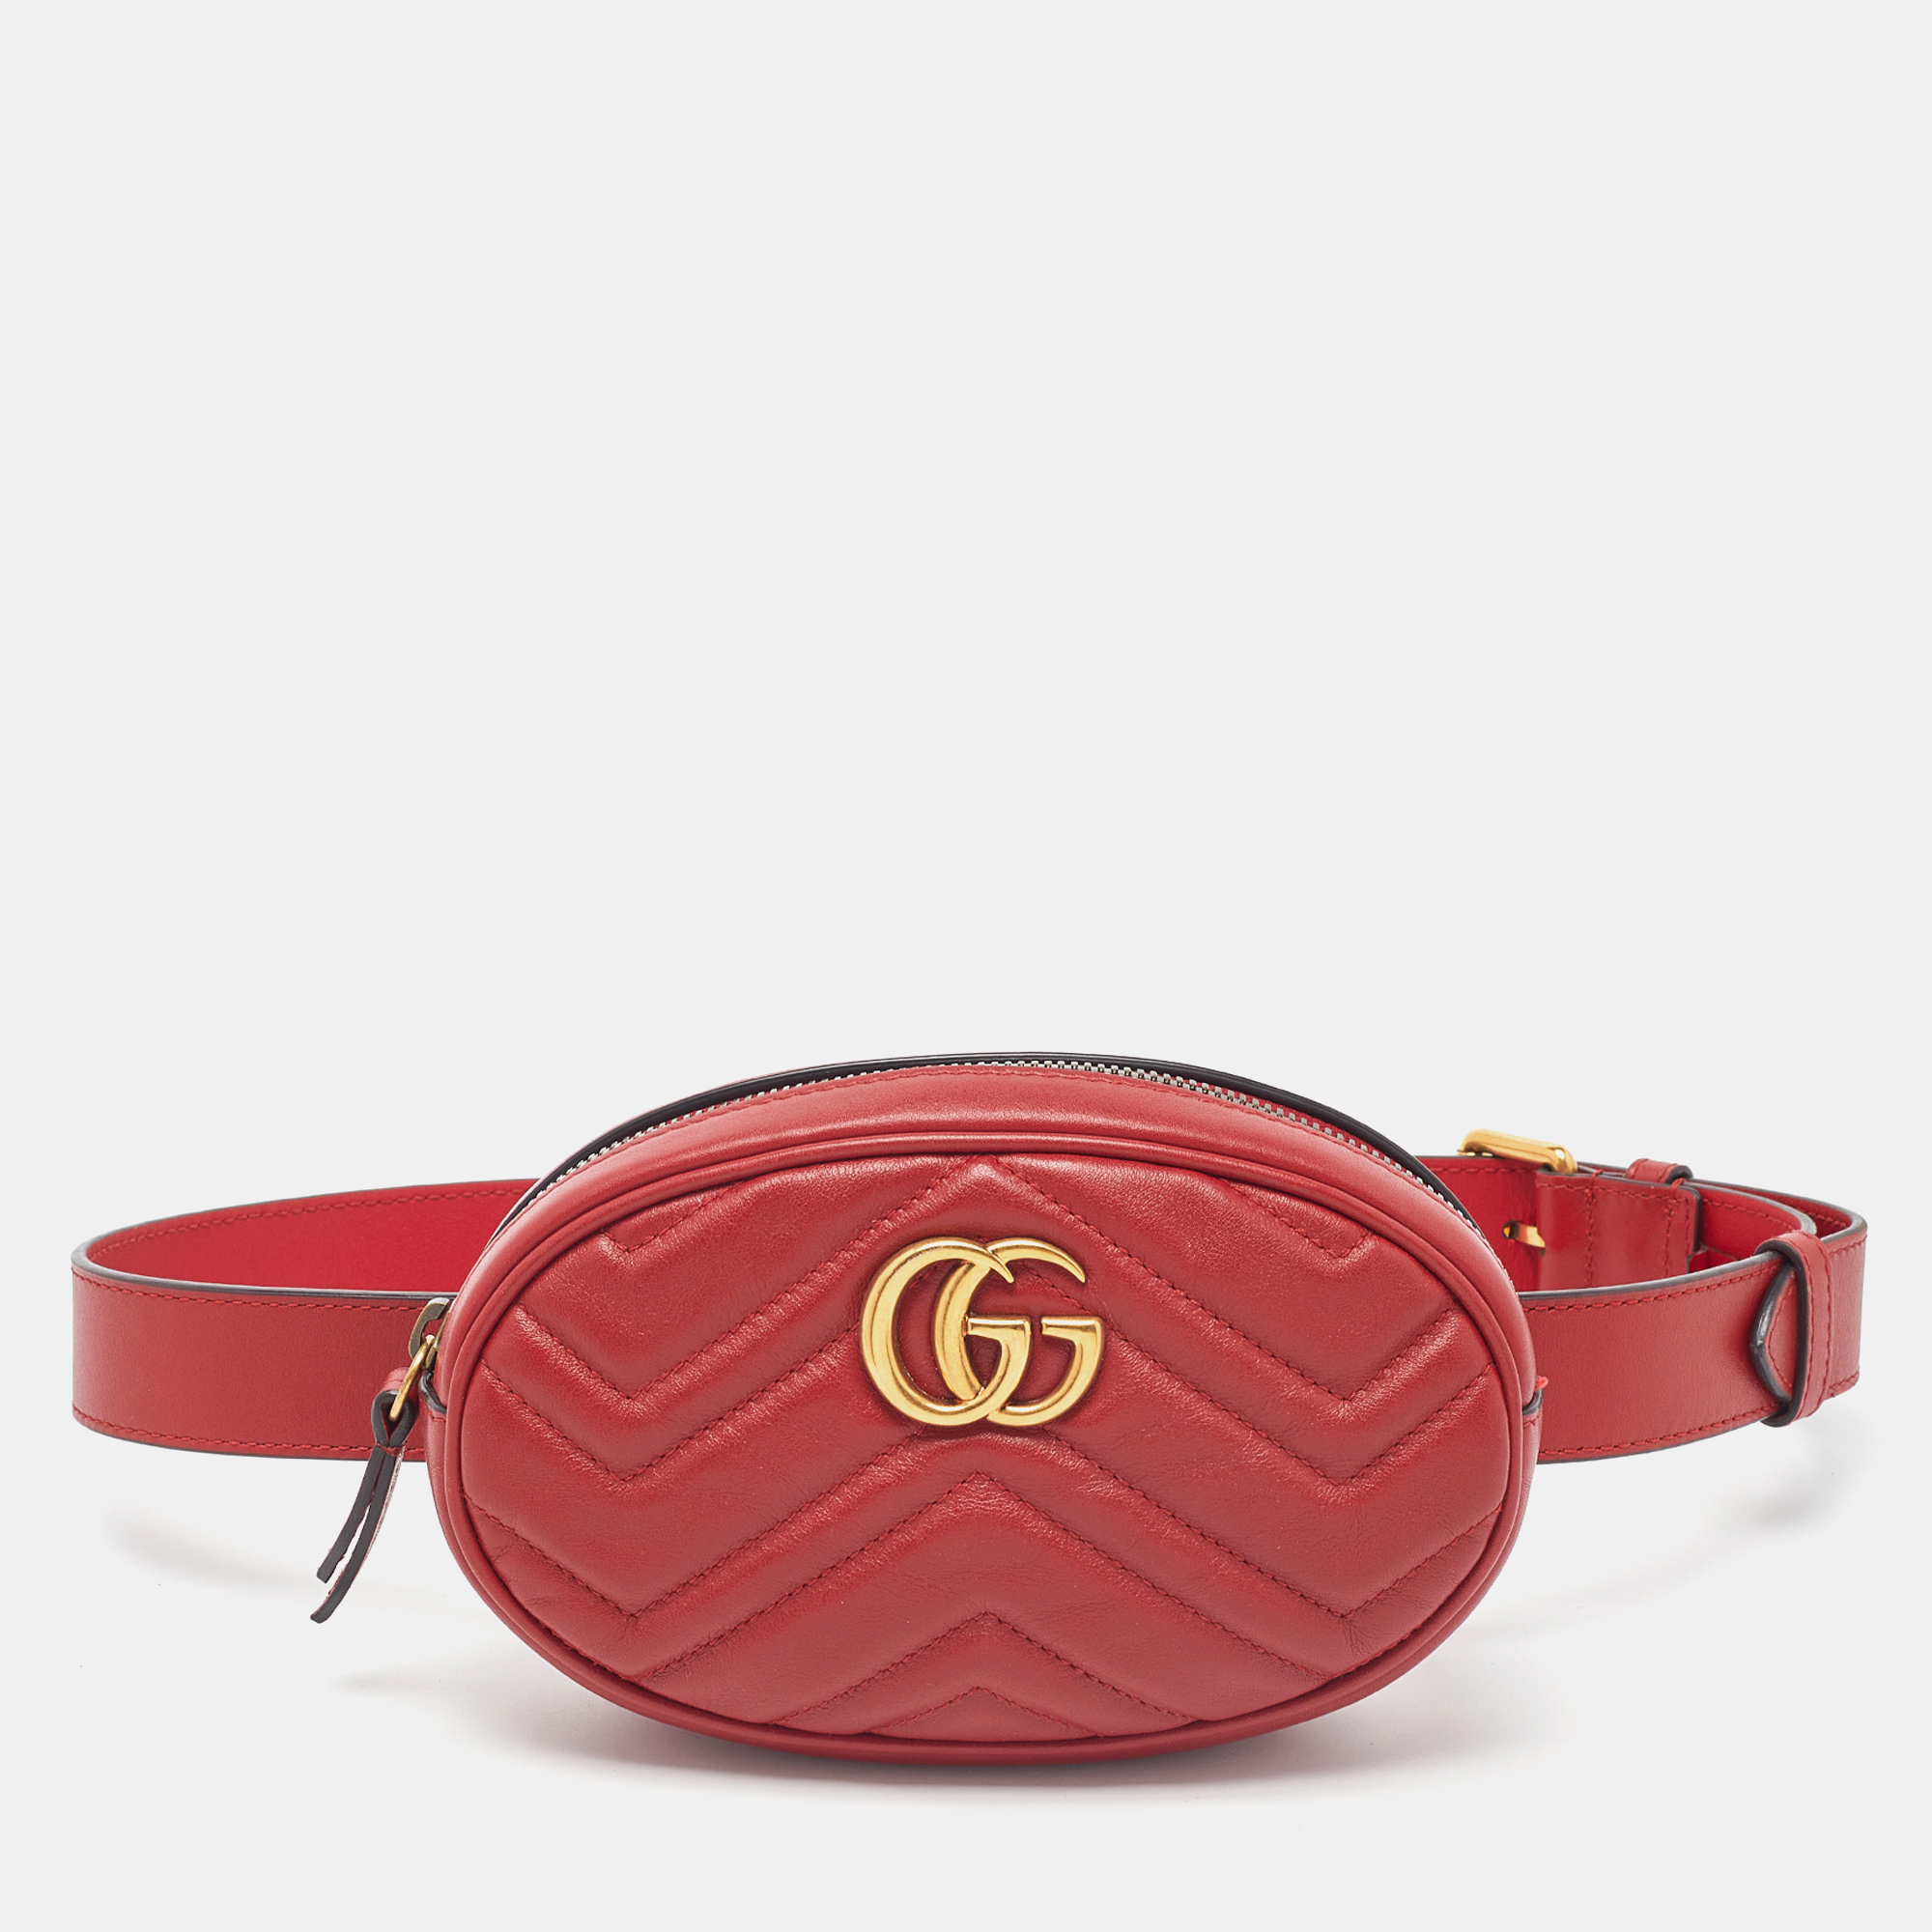 Gucci Red Leather GG Marmont Belt Bag Gucci